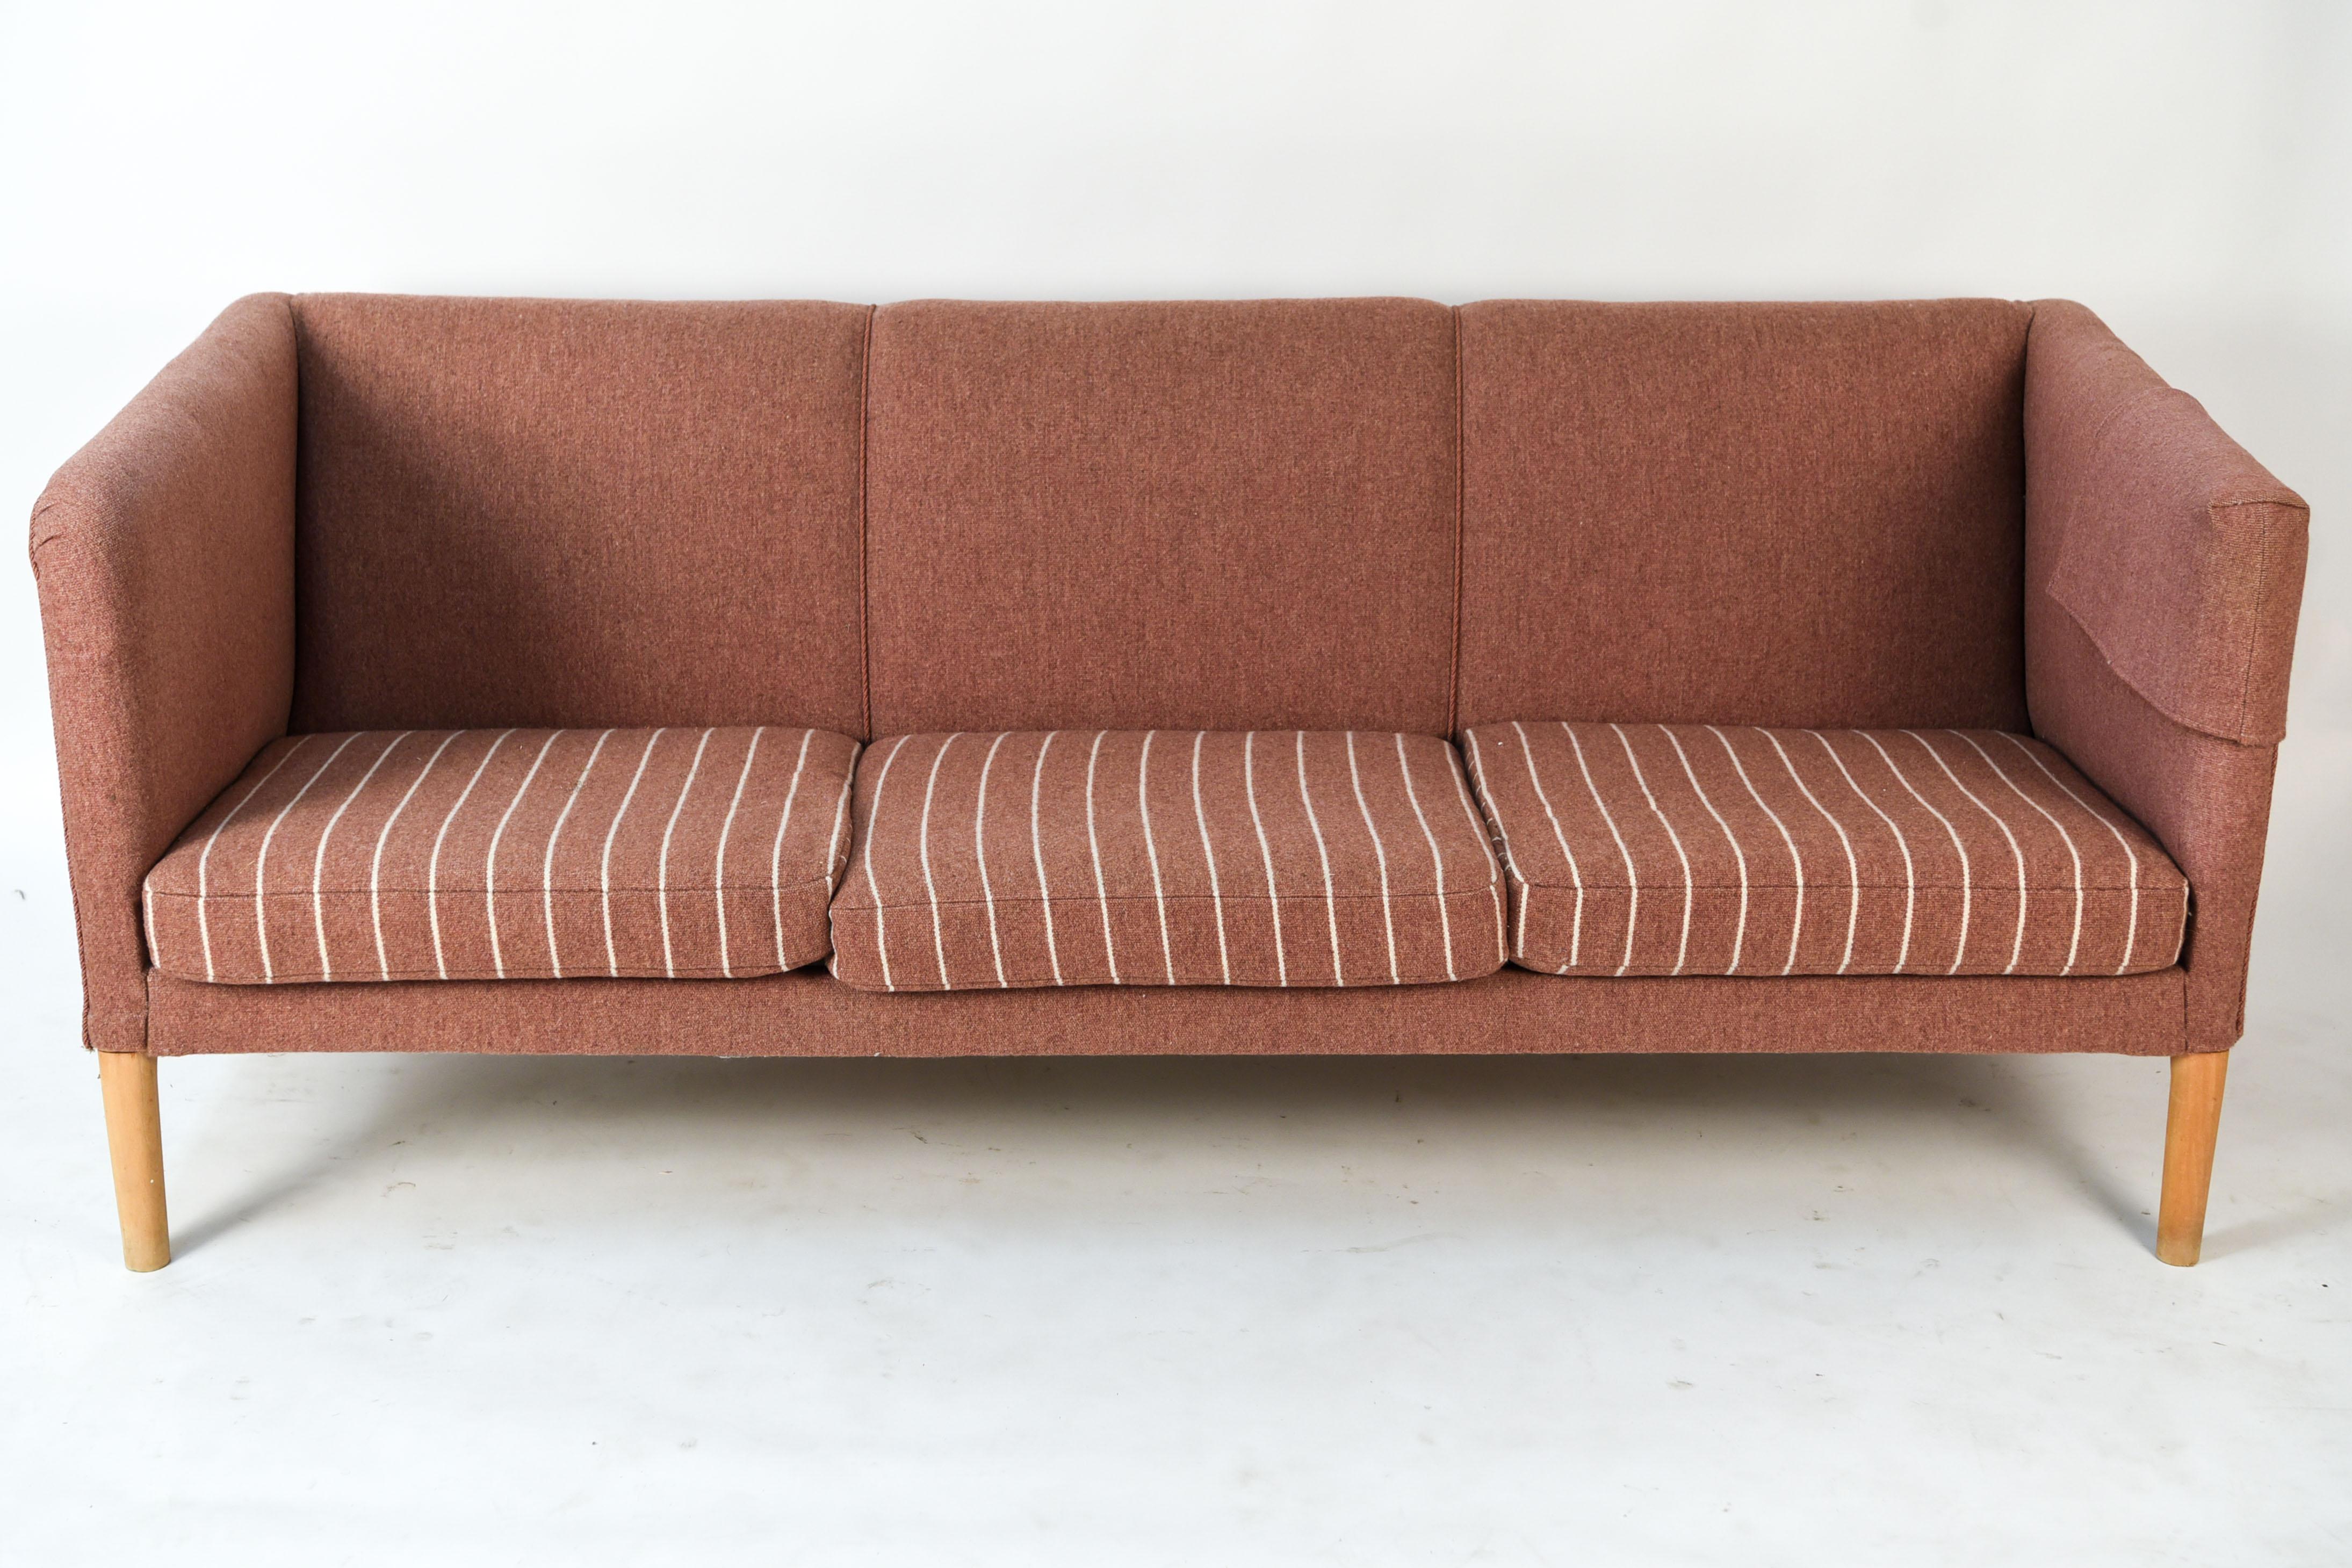 This rare sofa is model AP-18S designed by Hans Wegner and produced by AP Stolen, circa 1955. This is one of Wegner's harder to find sofas, making it a highly desirable piece. This sofa features original wool upholstery over a solid oak frame.